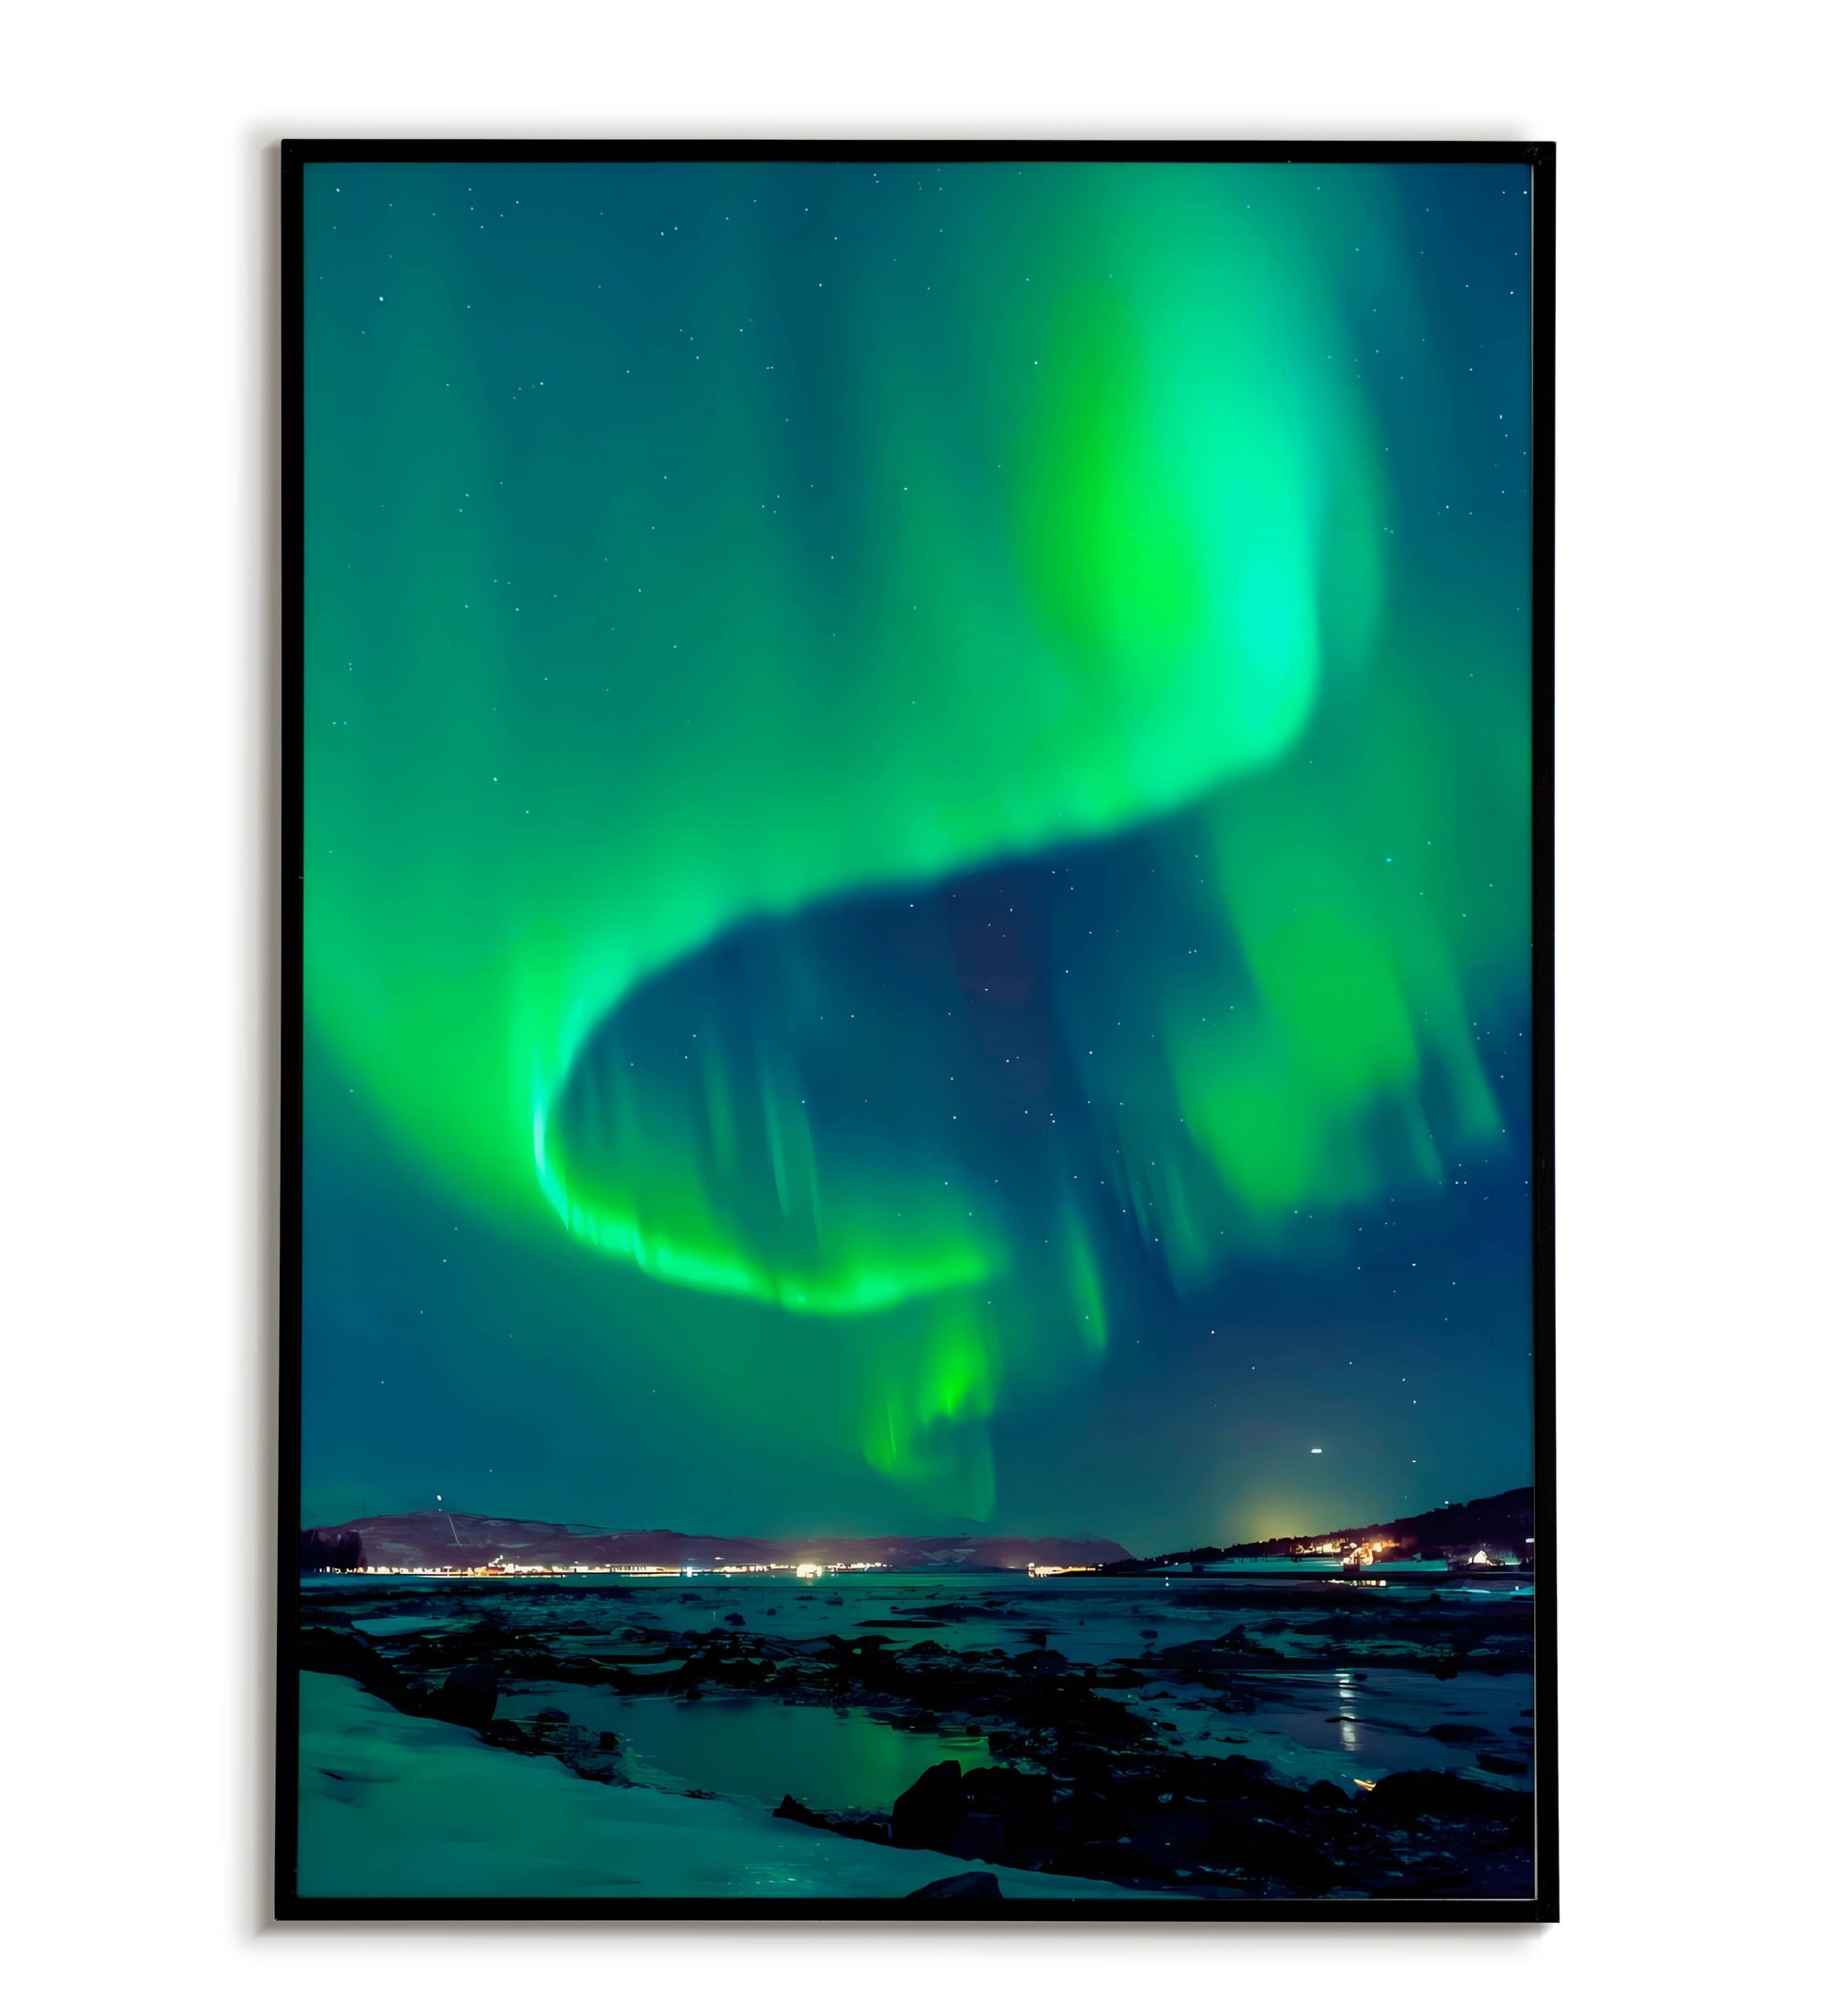 Northern Lights - Printable Wall Art / Poster. Download this awe-inspiring image to bring a touch of wonder to your decor.